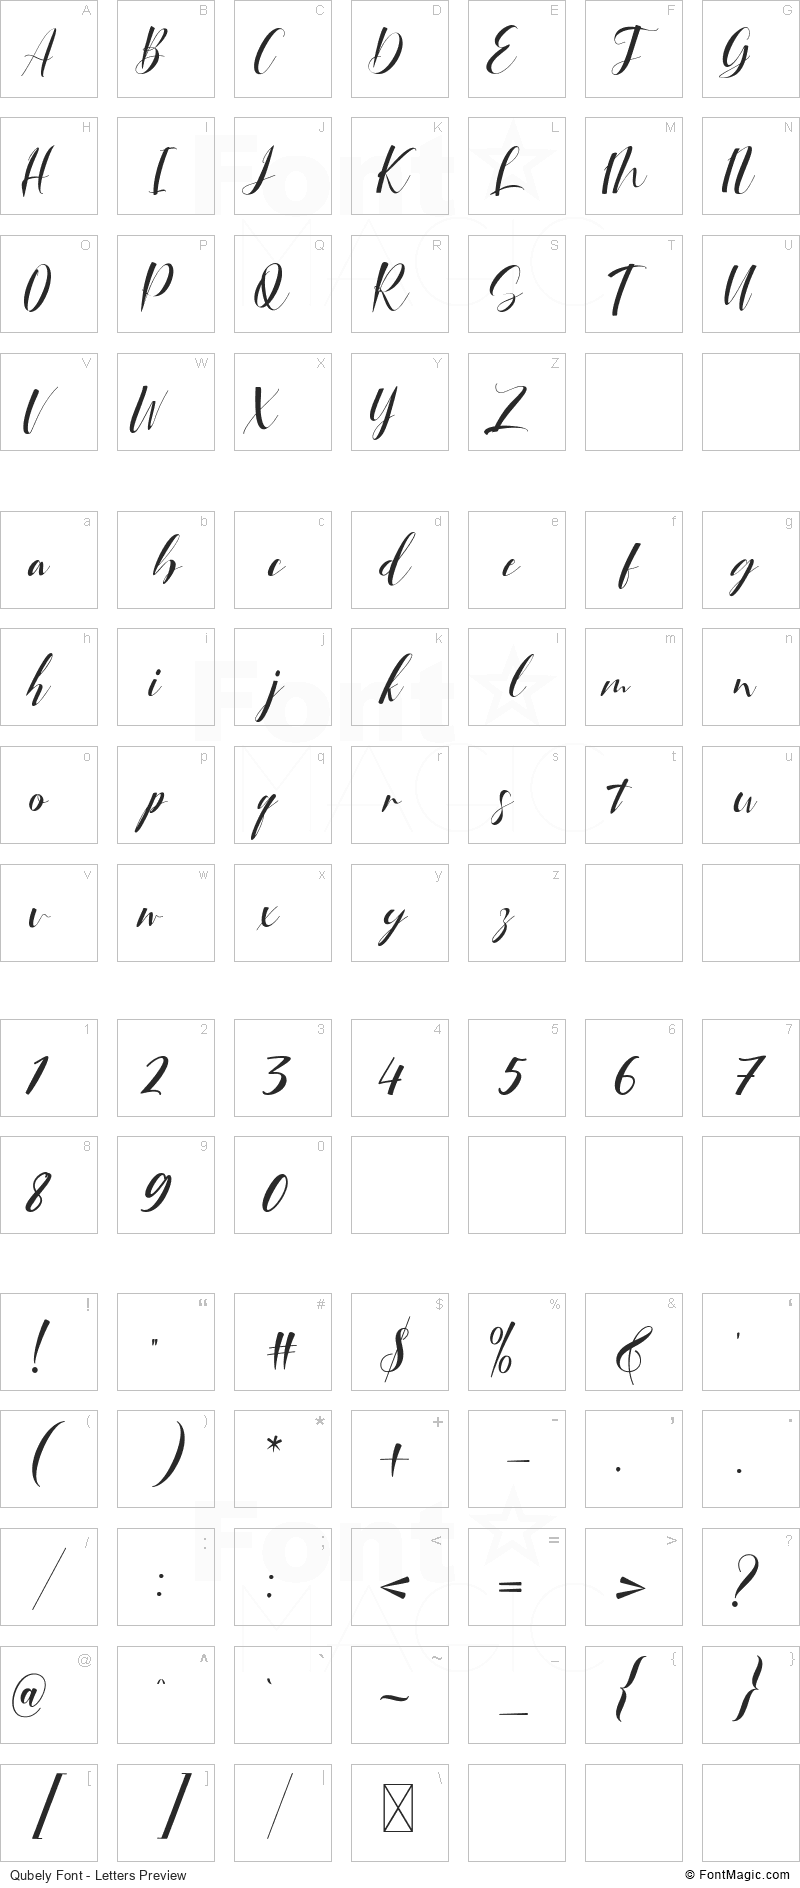 Qubely Font - All Latters Preview Chart